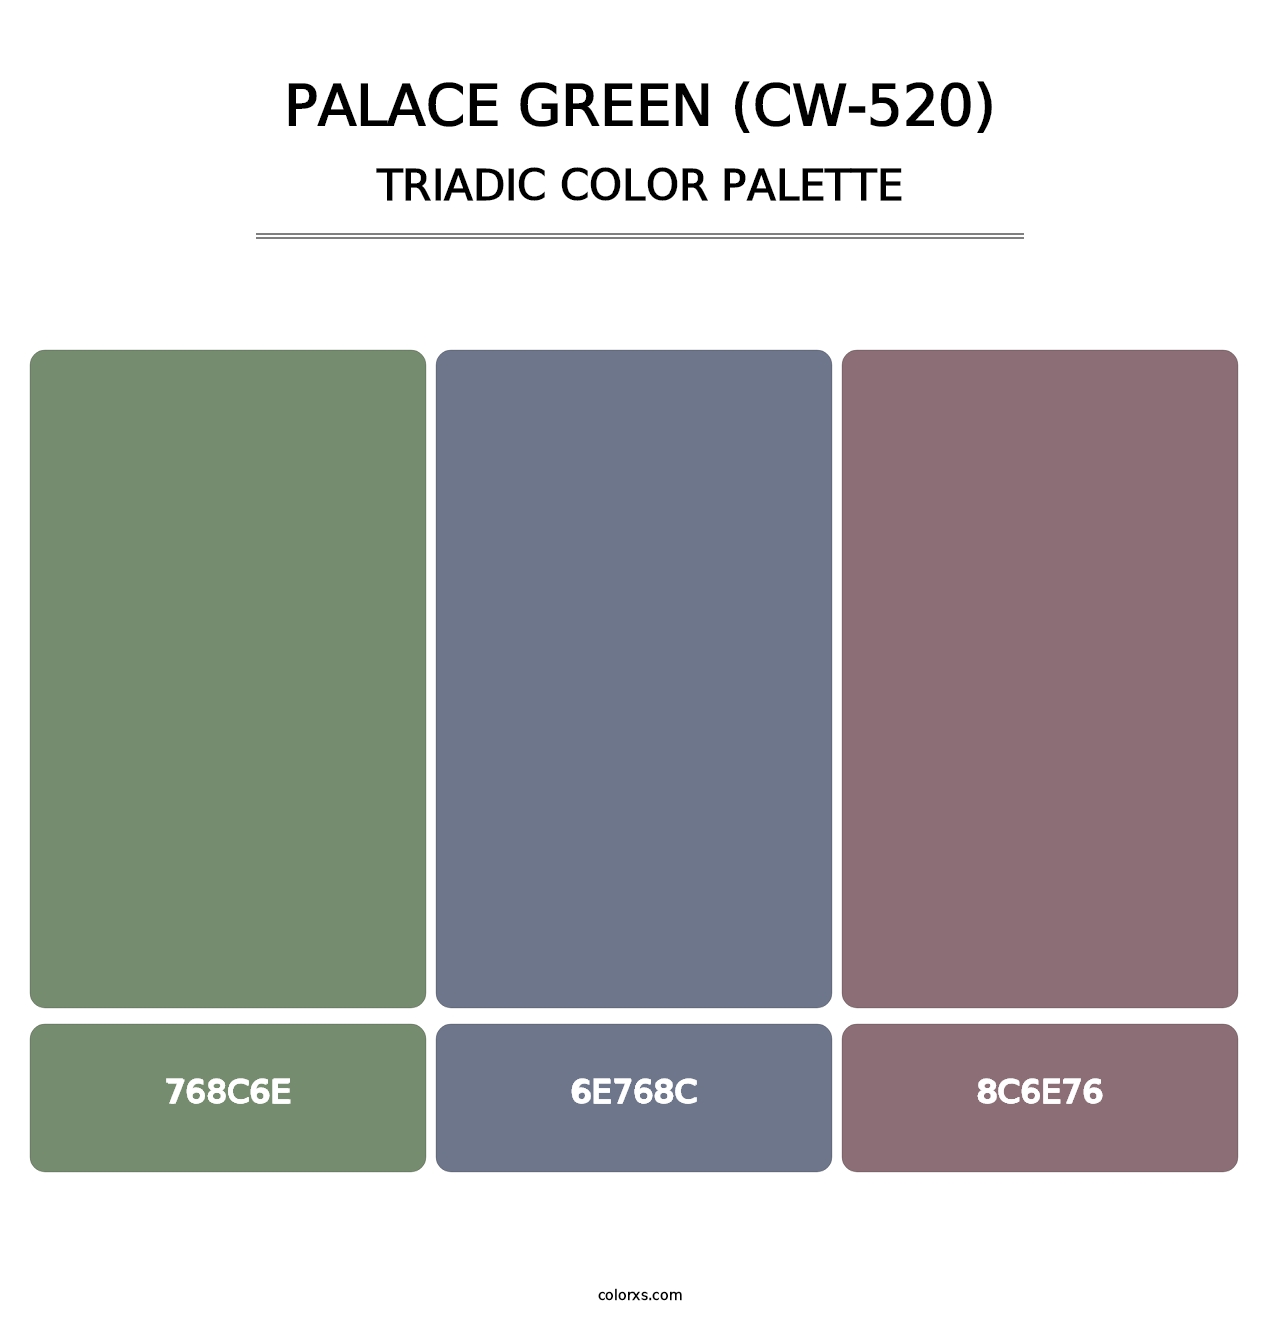 Palace Green (CW-520) - Triadic Color Palette